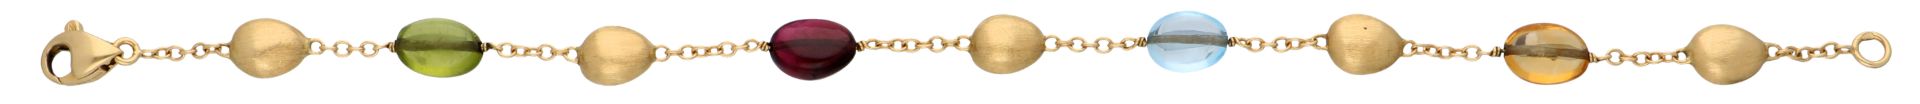 No Reserve - Marco Bicego 18K yellow gold link bracelet. - Image 3 of 4